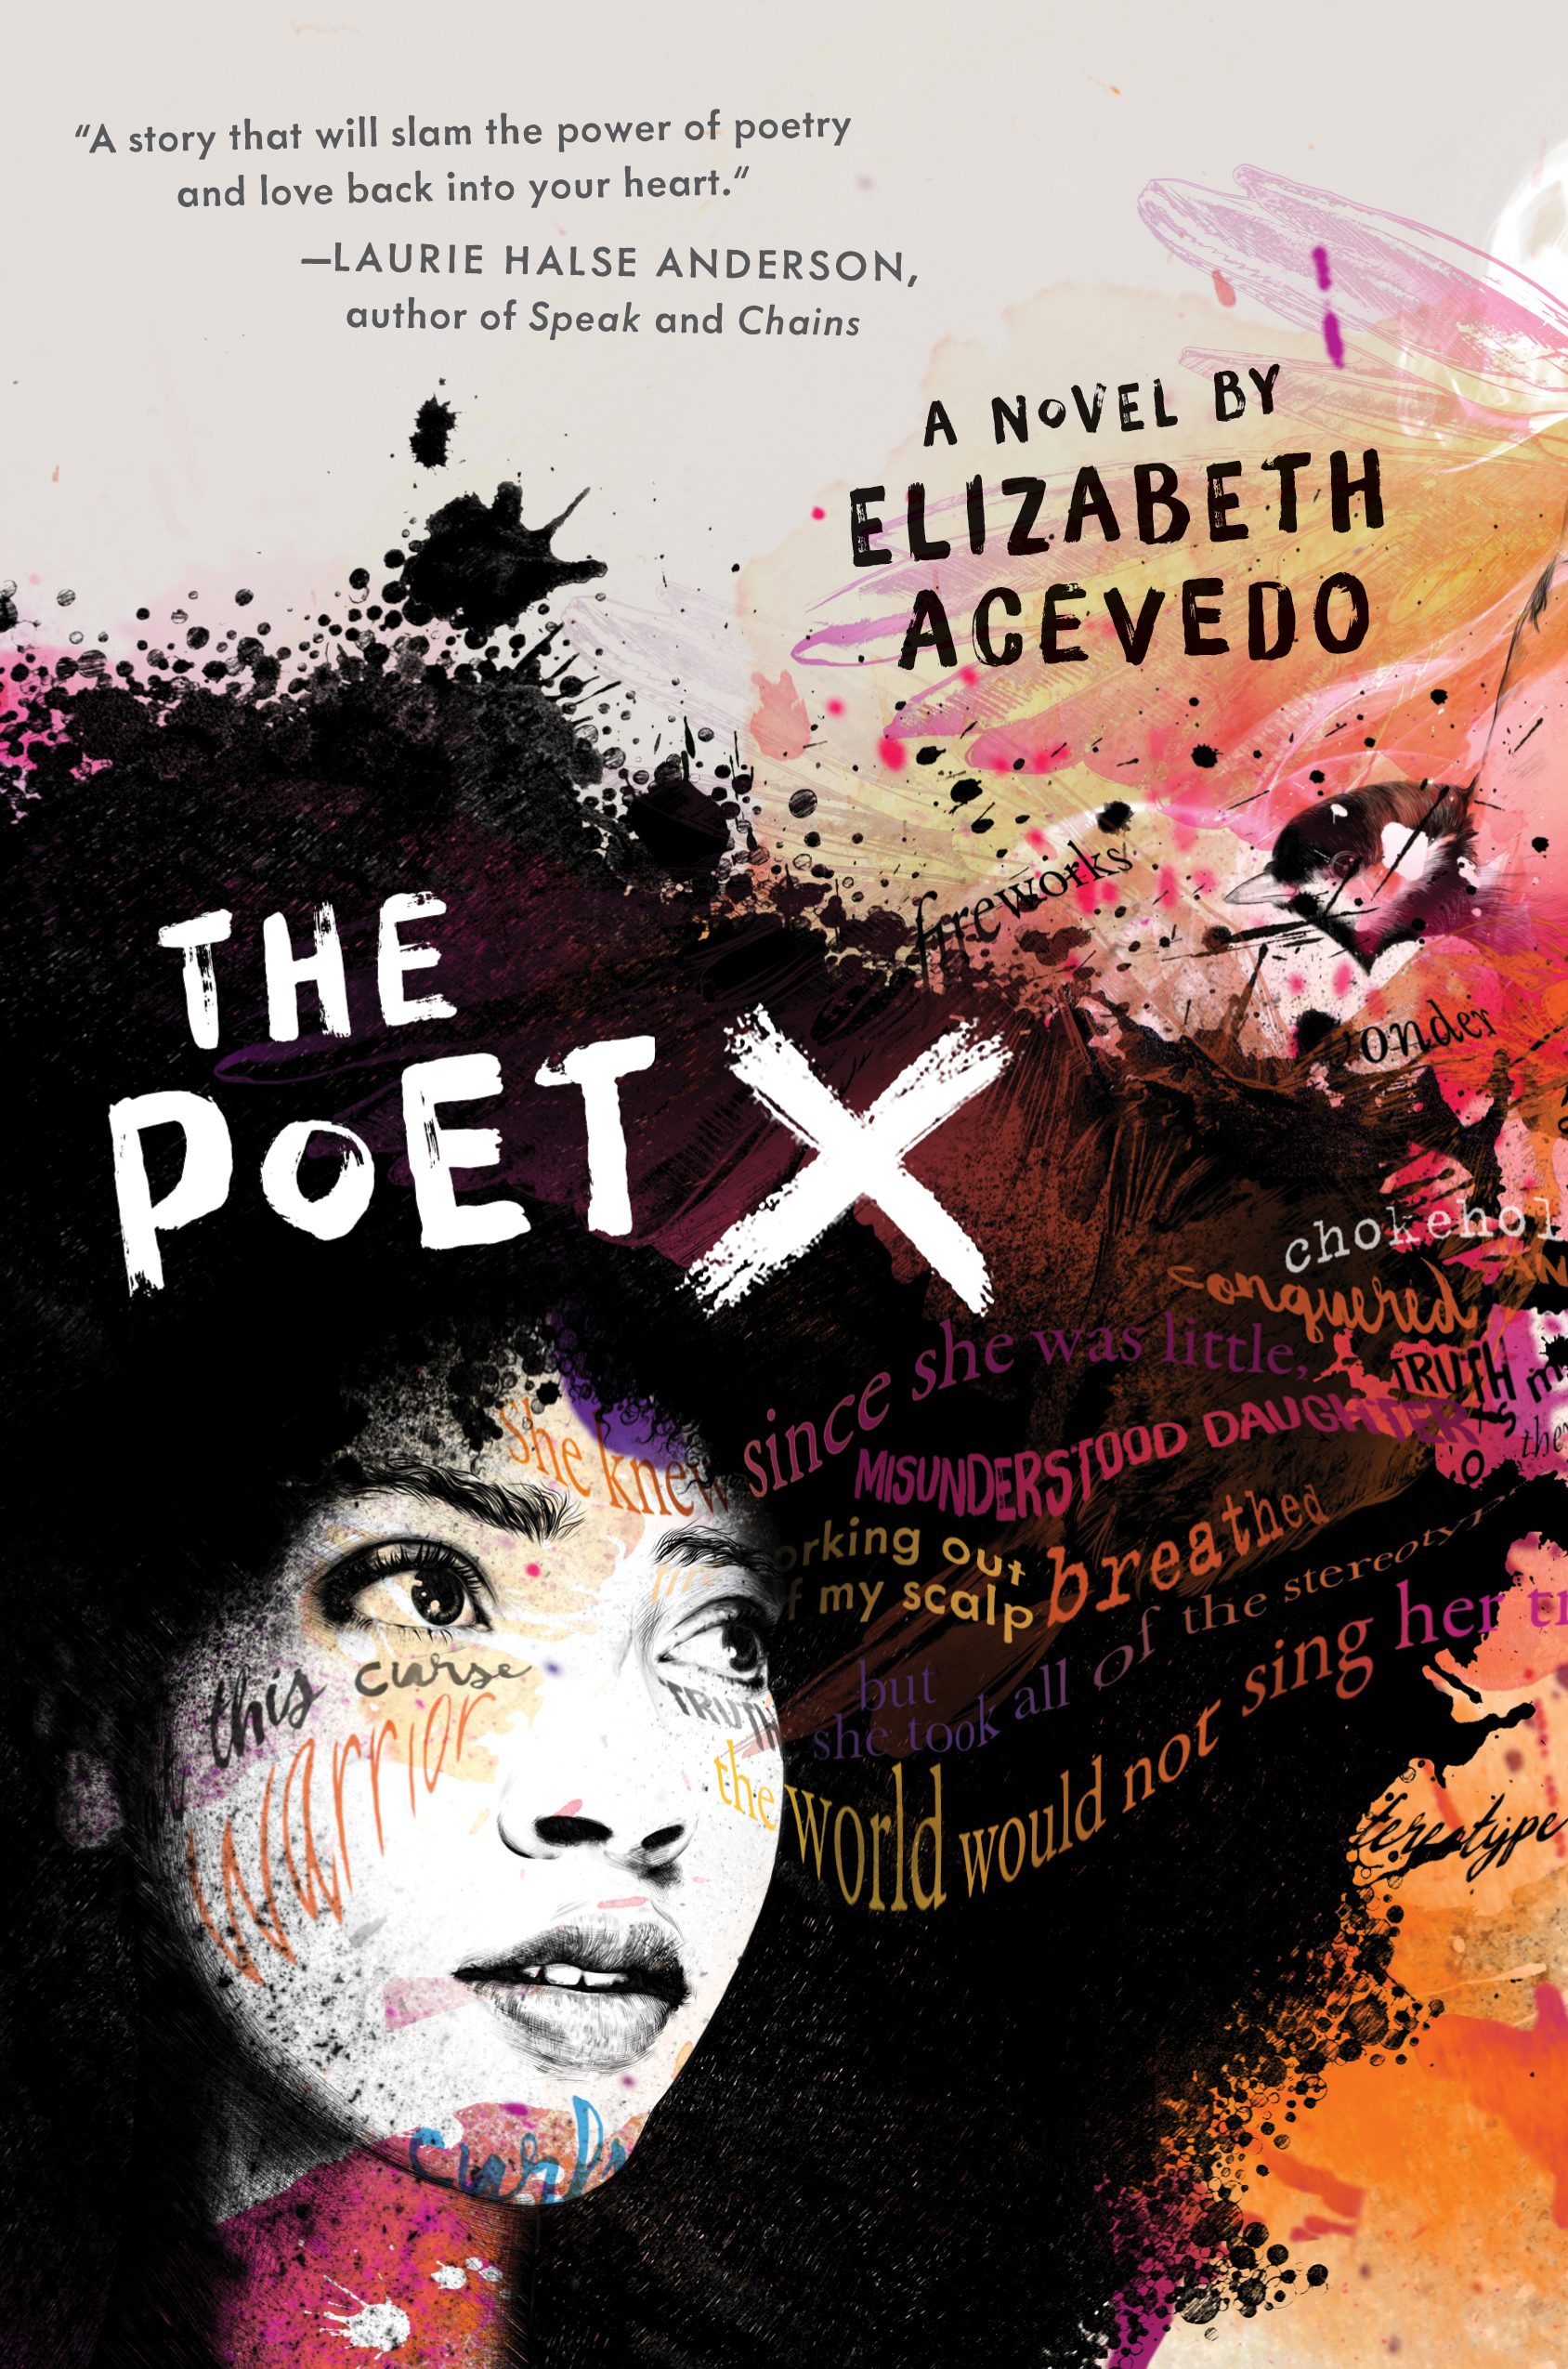 The book 'The poet x' by Elizabeth Acevedo, a woman with an afro on the cover